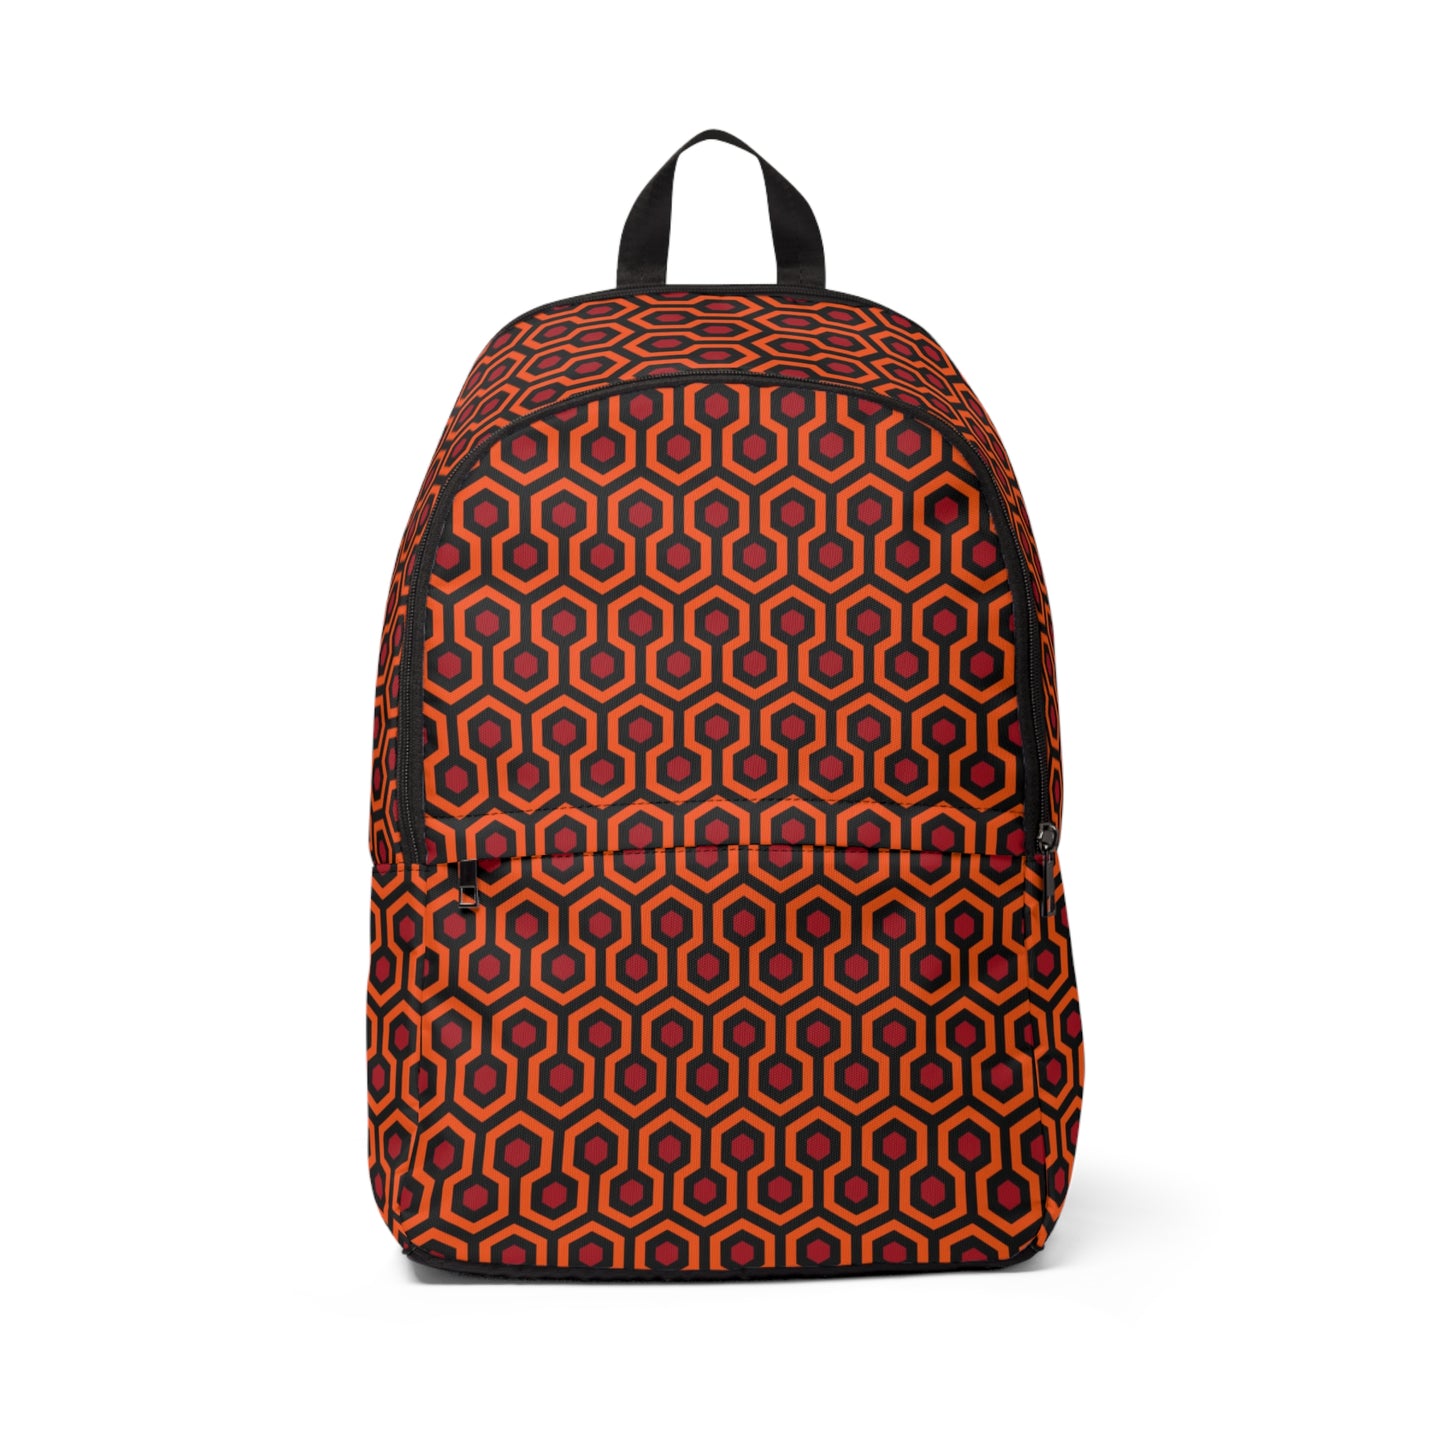 The Overlook Fabric Backpack